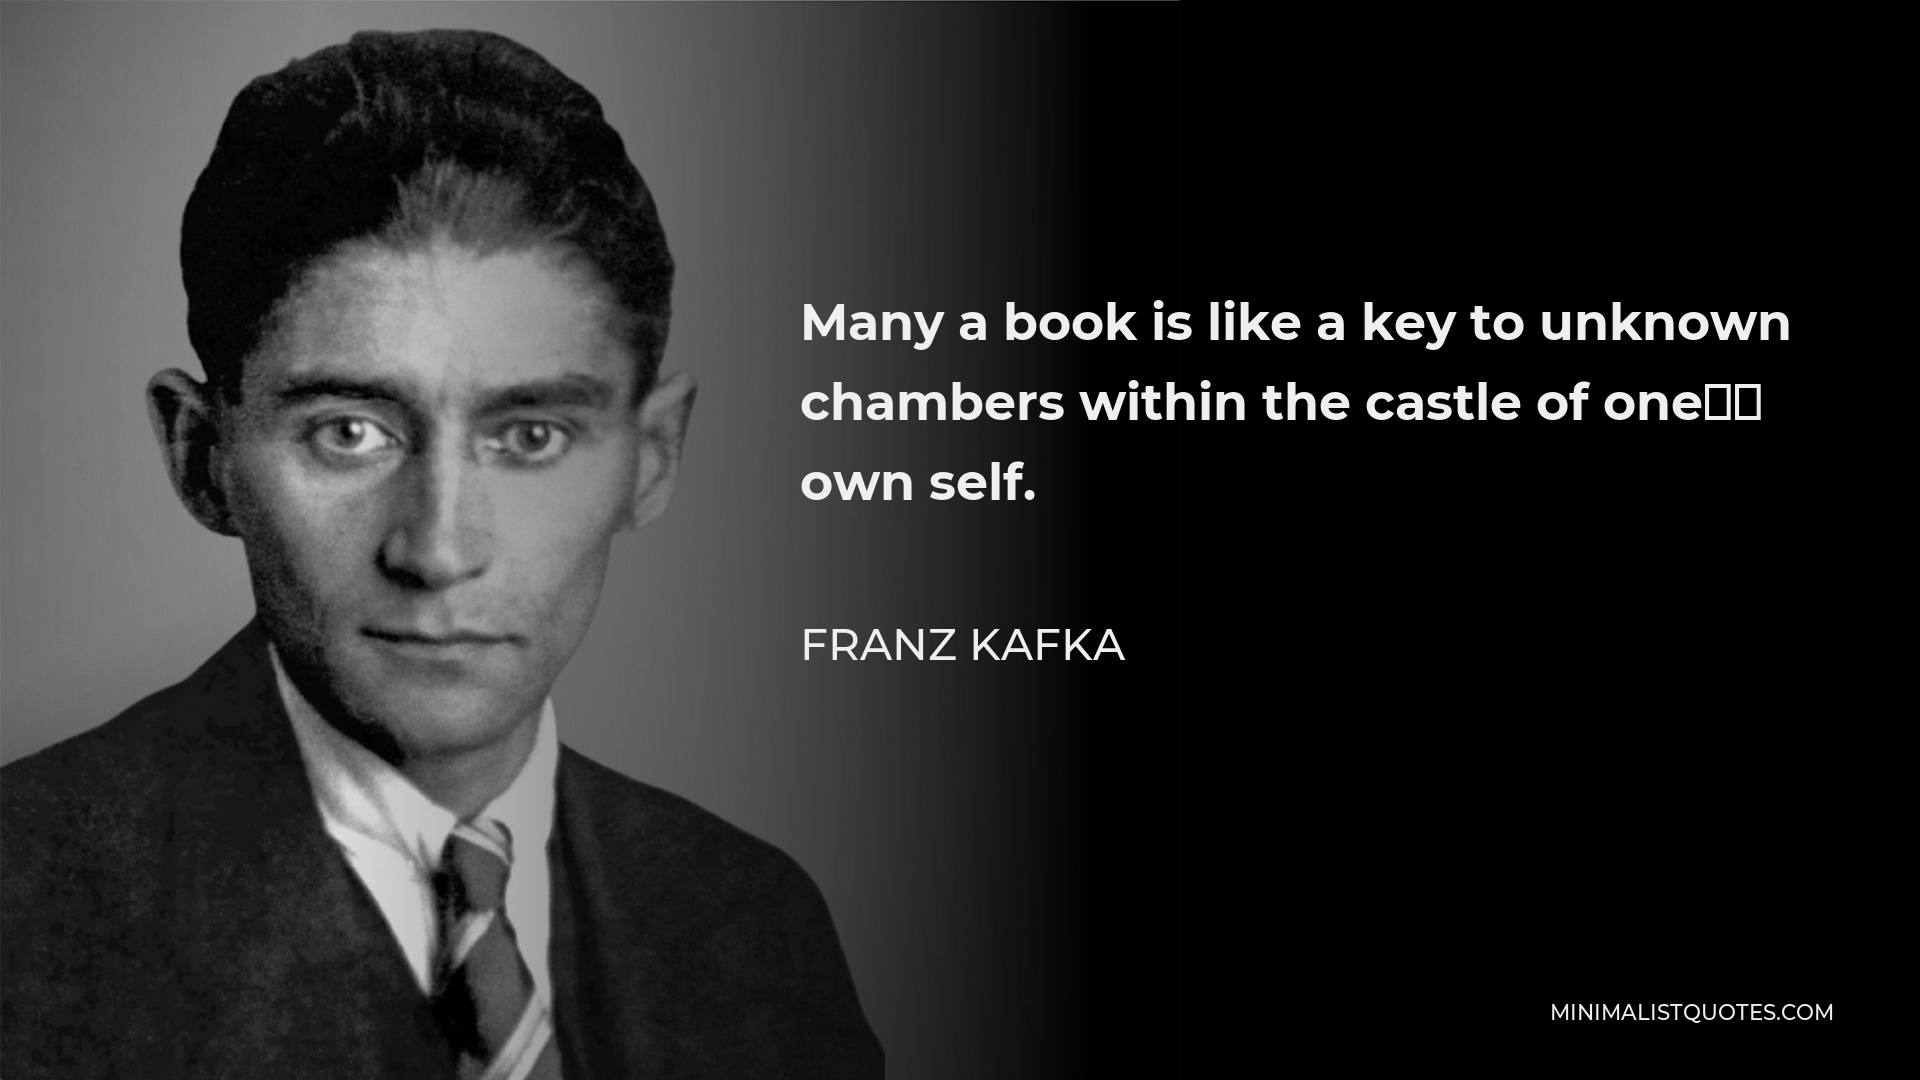 Franz Kafka Quote - Many a book is like a key to unknown chambers within the castle of one’s own self.